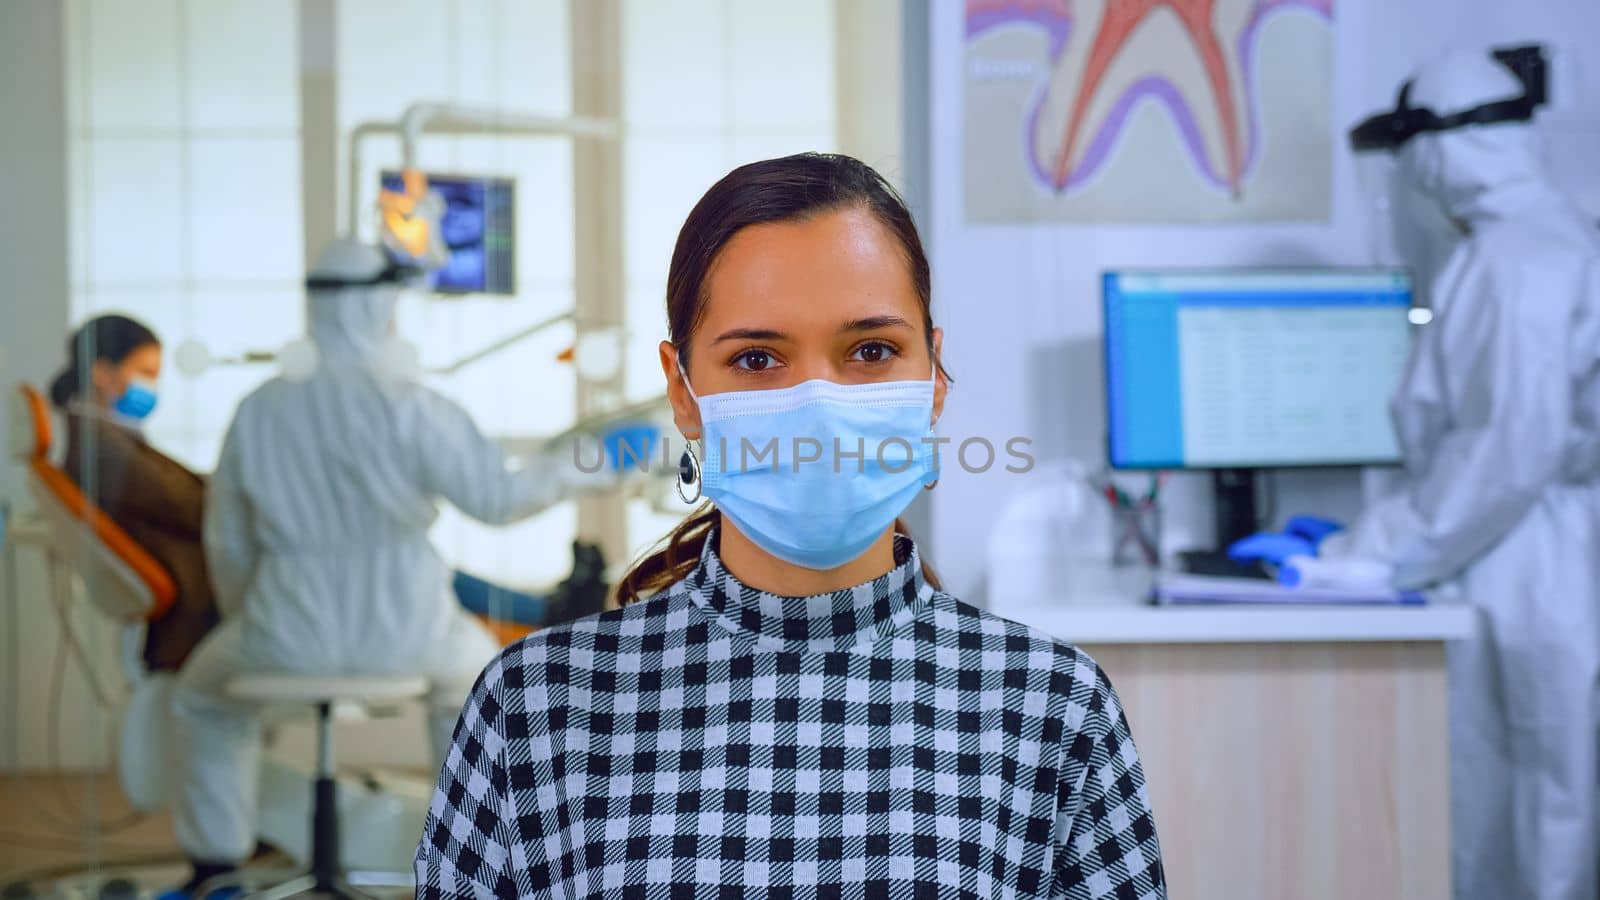 Portrait of woman with mask in dental office looking on camera by DCStudio